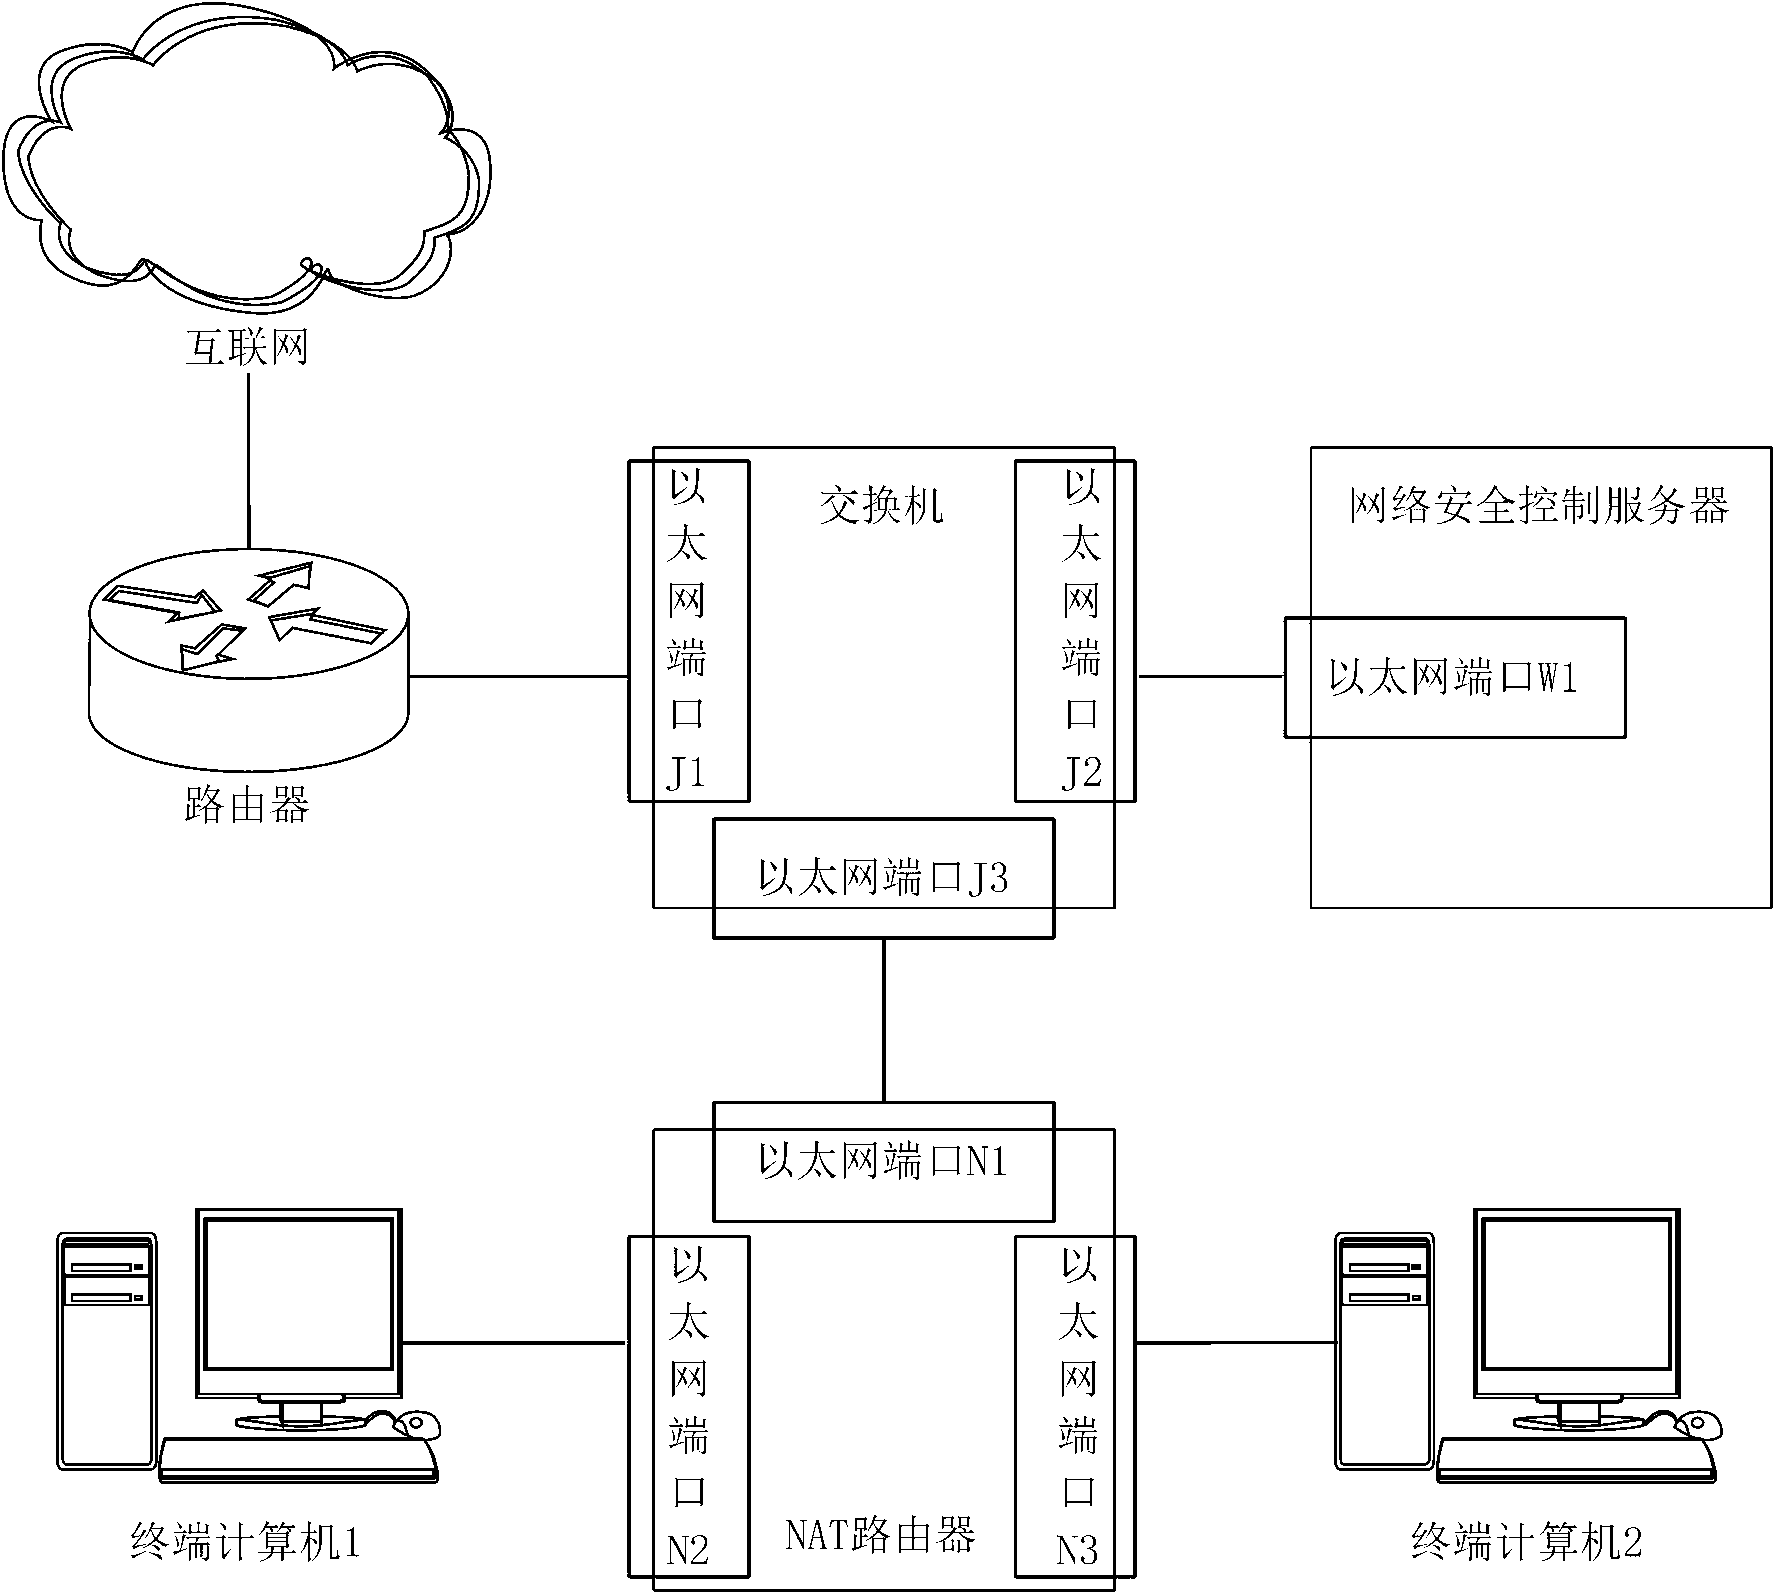 Method for controlling network access based on identification in IP (Internet Protocol) protocol